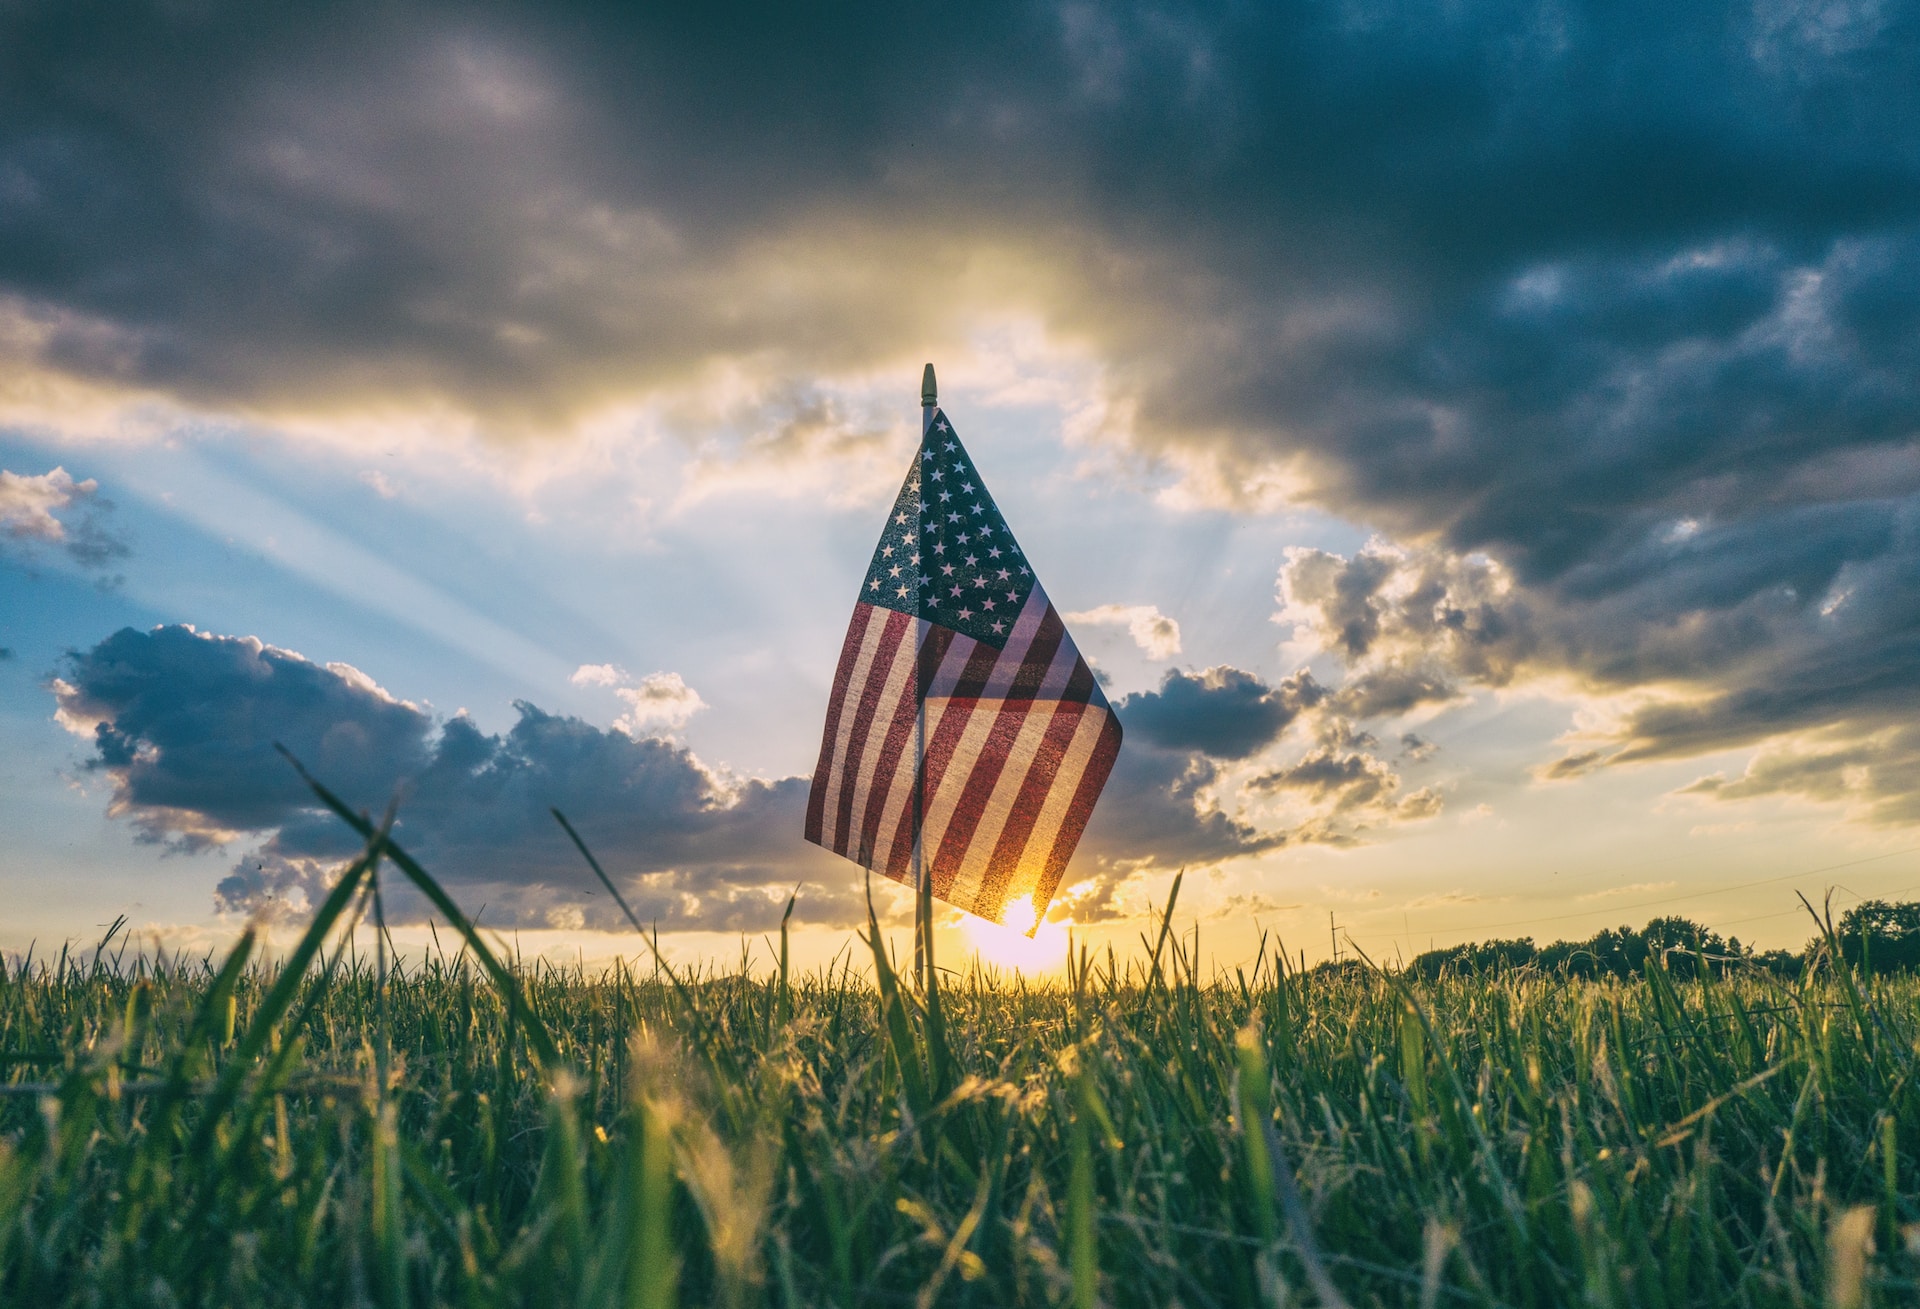 American flag in the grass on cloudy sky at sunset